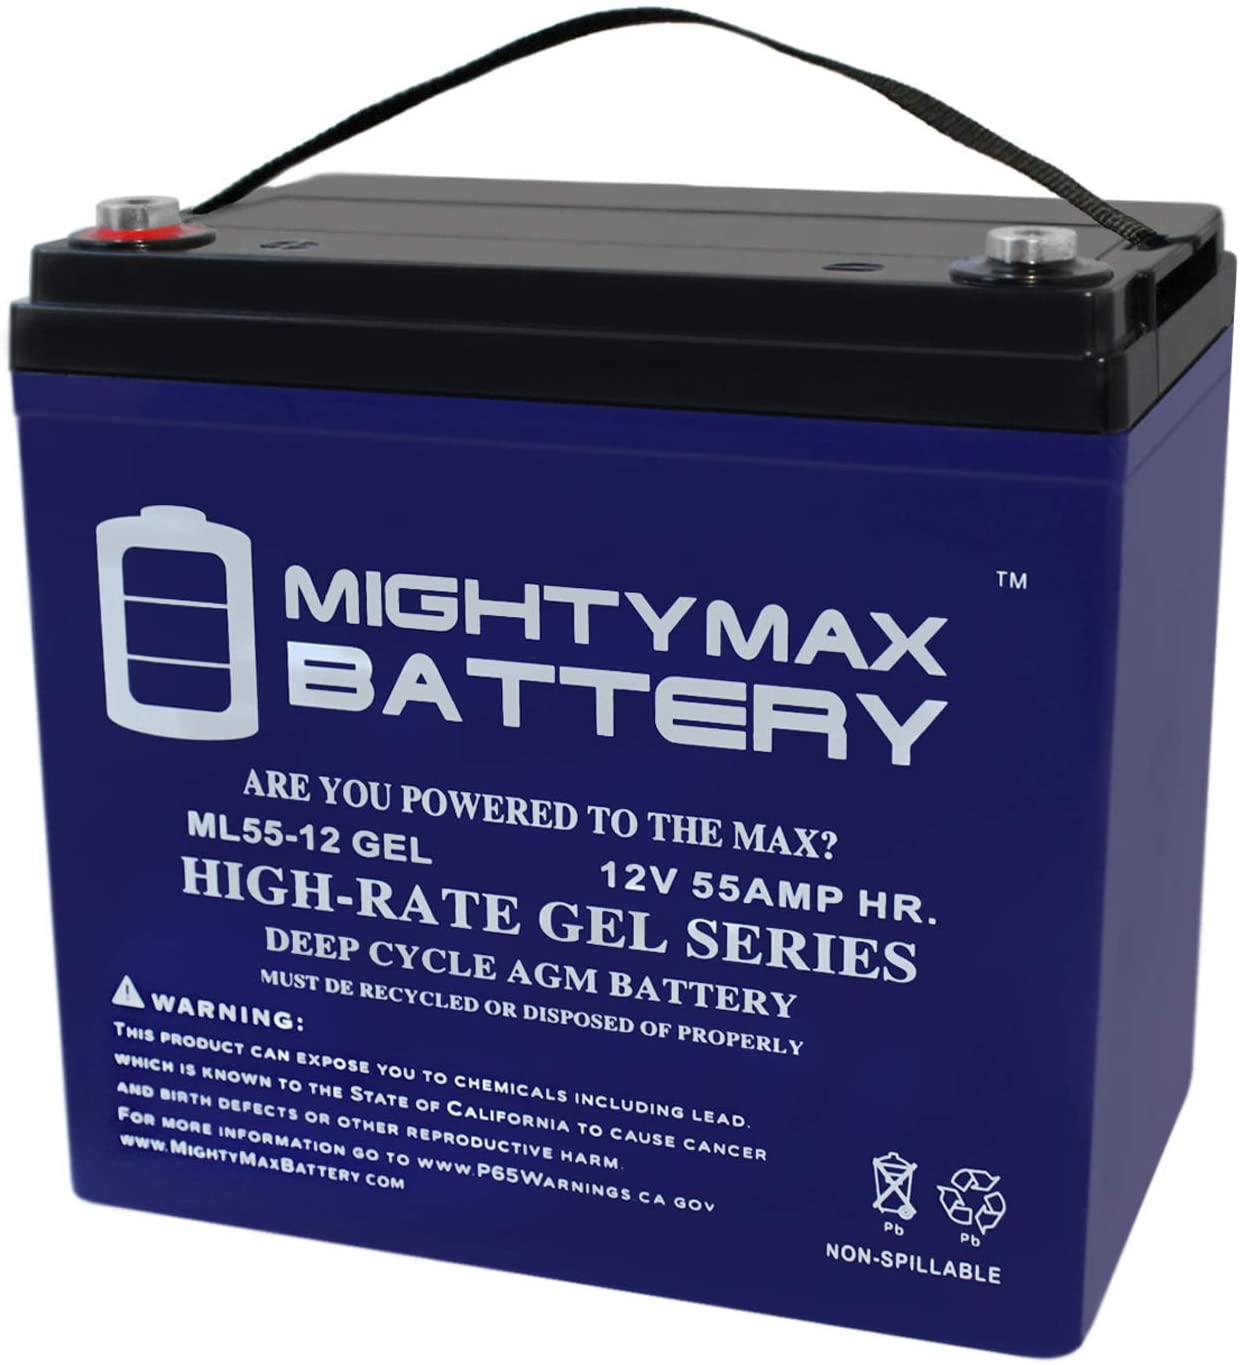 Mighty Max Battery 12V 55AH Gel Replacement Battery Compatible with Minn Kota Trolling Motors Brand Product KB922